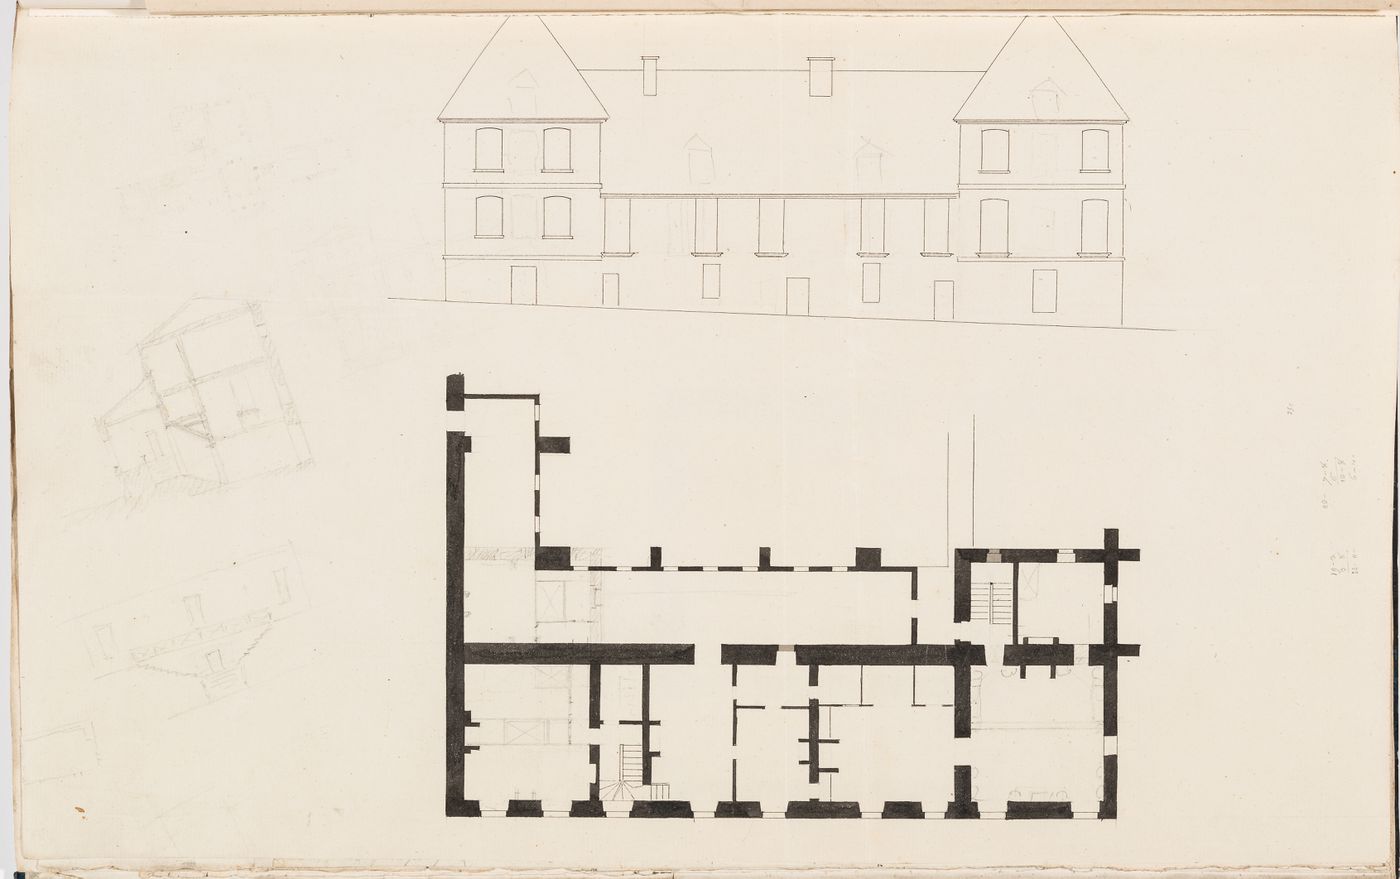 Elevation and plan, probably of the first floor of the house, Domaine de La Vallée